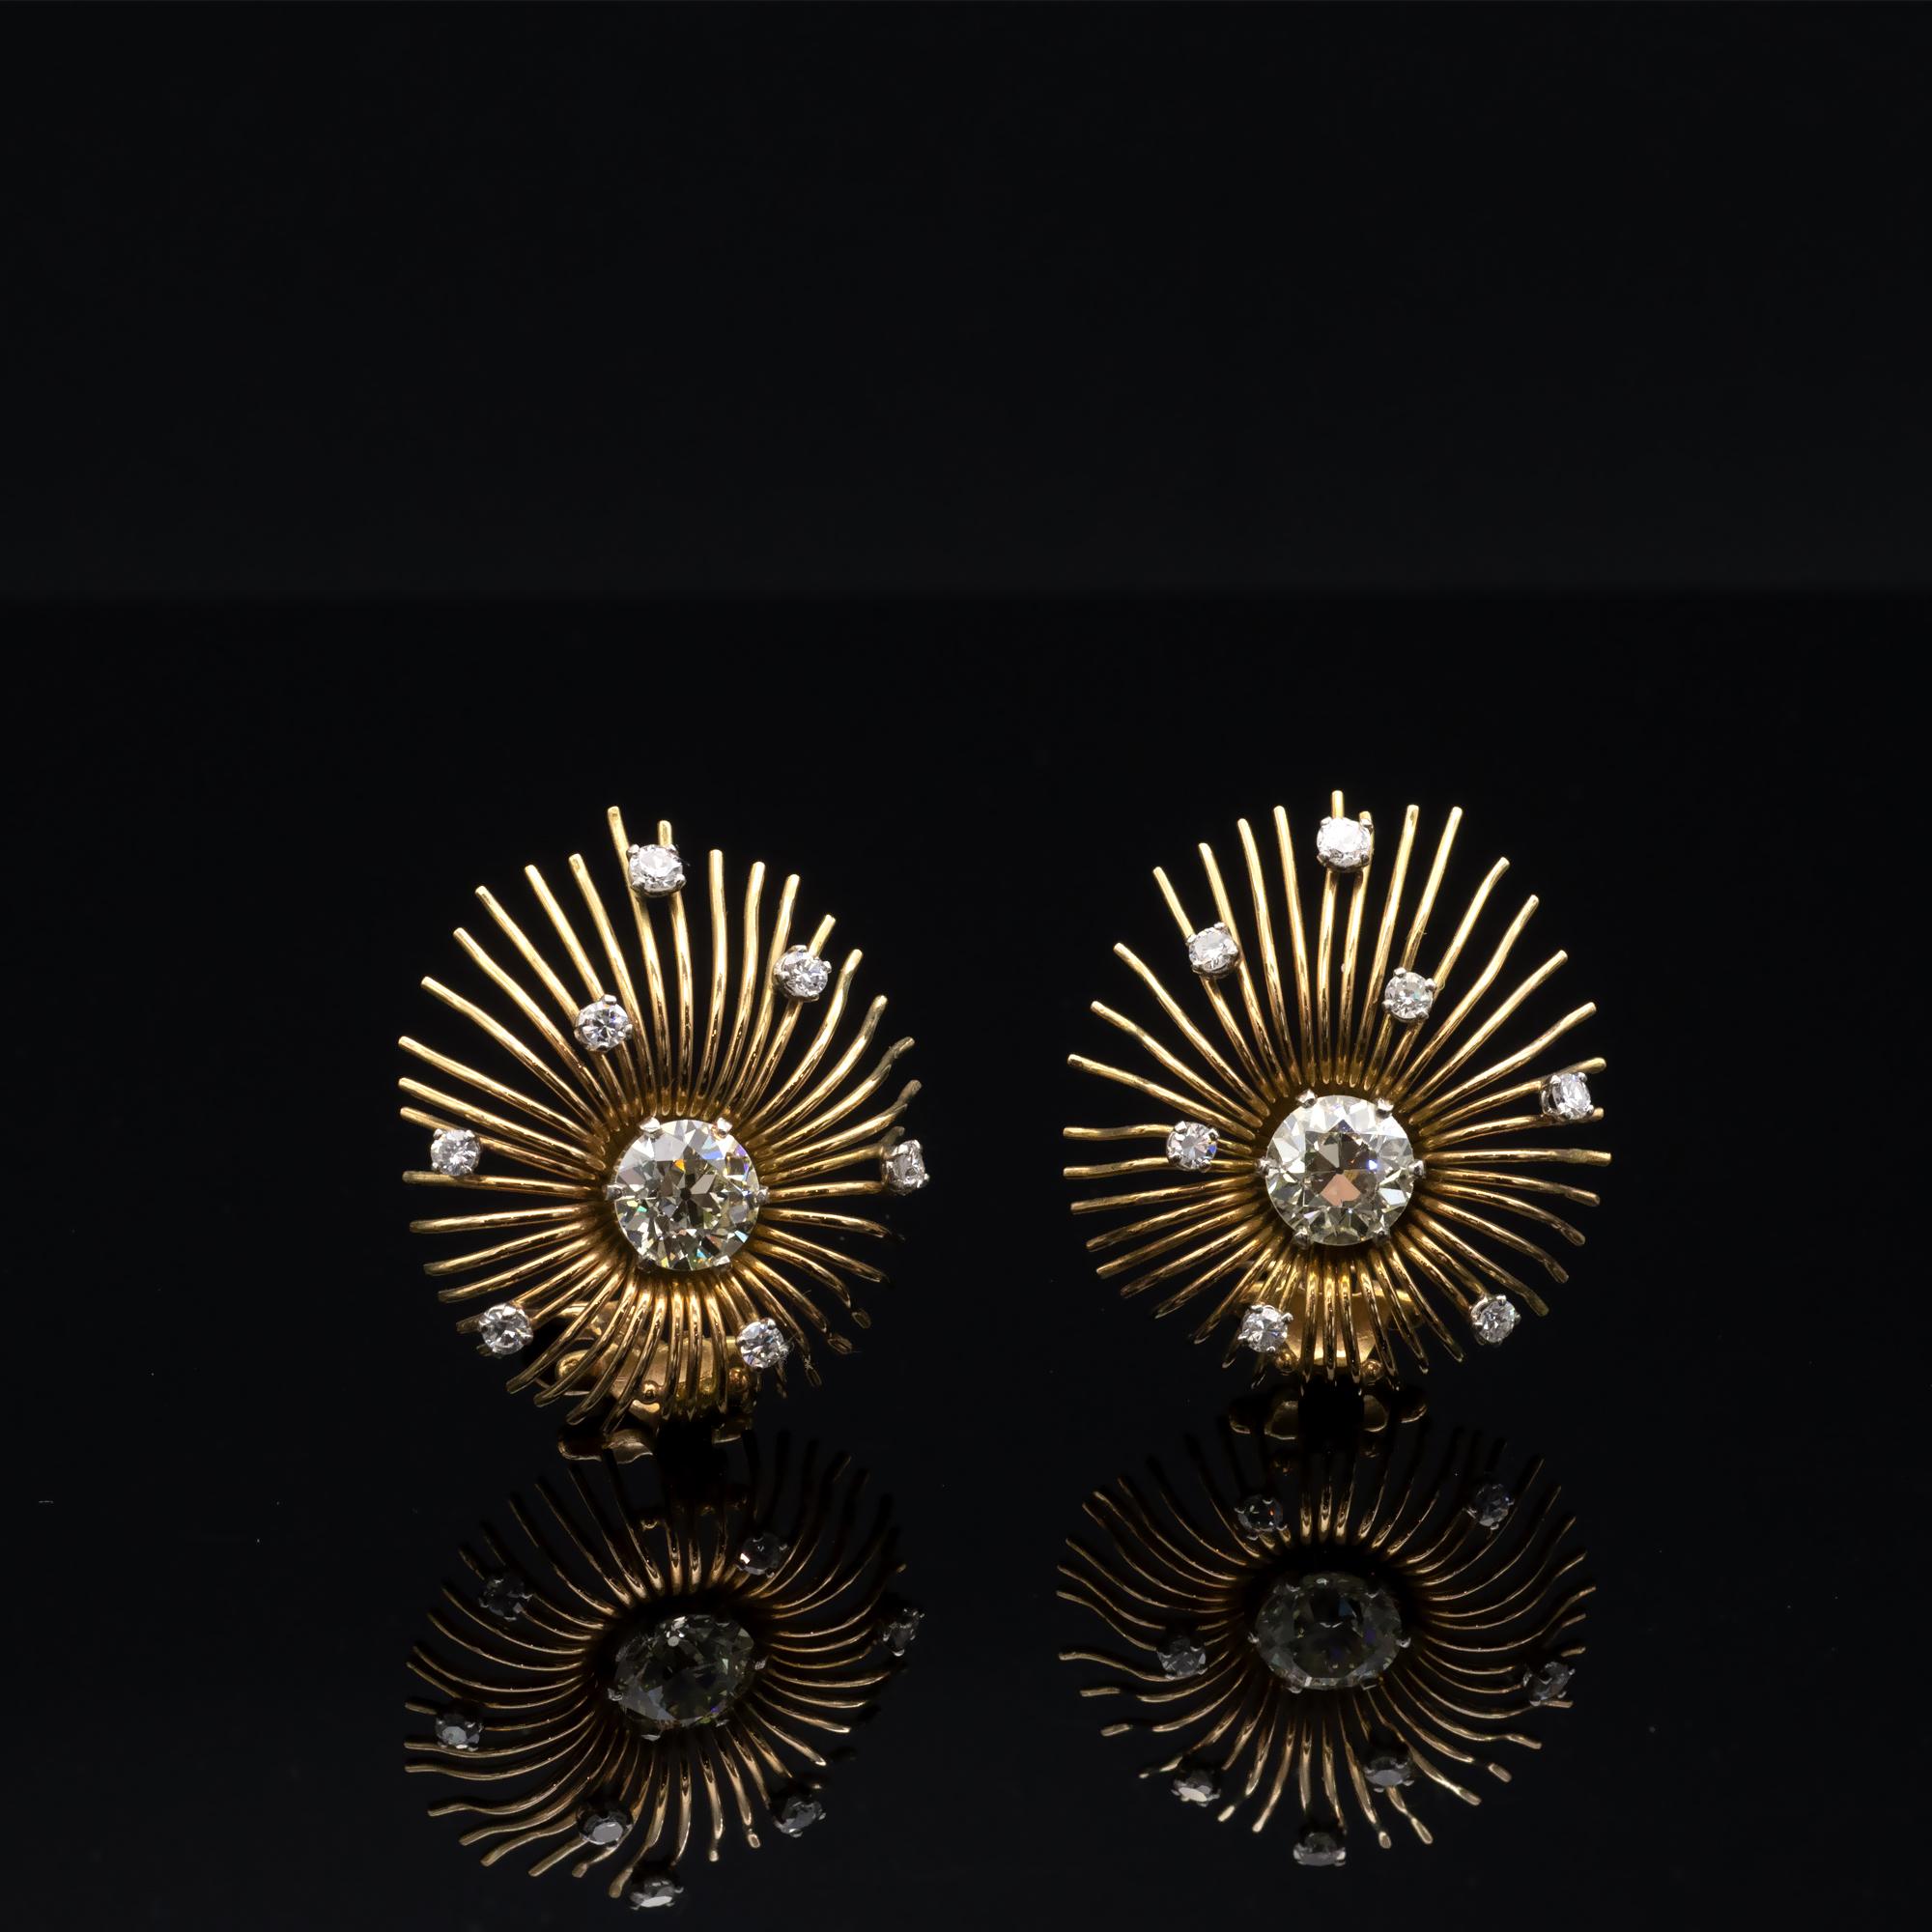 18k yellow gold earrings crafted in an exquisite feathery look showcasing two old European cut diamonds ( approx. 2.70 carat in total  KL VS2/SI1 ) . The central diamonds are wonderfully complimented by the diamonds sprinkled around the earring. All